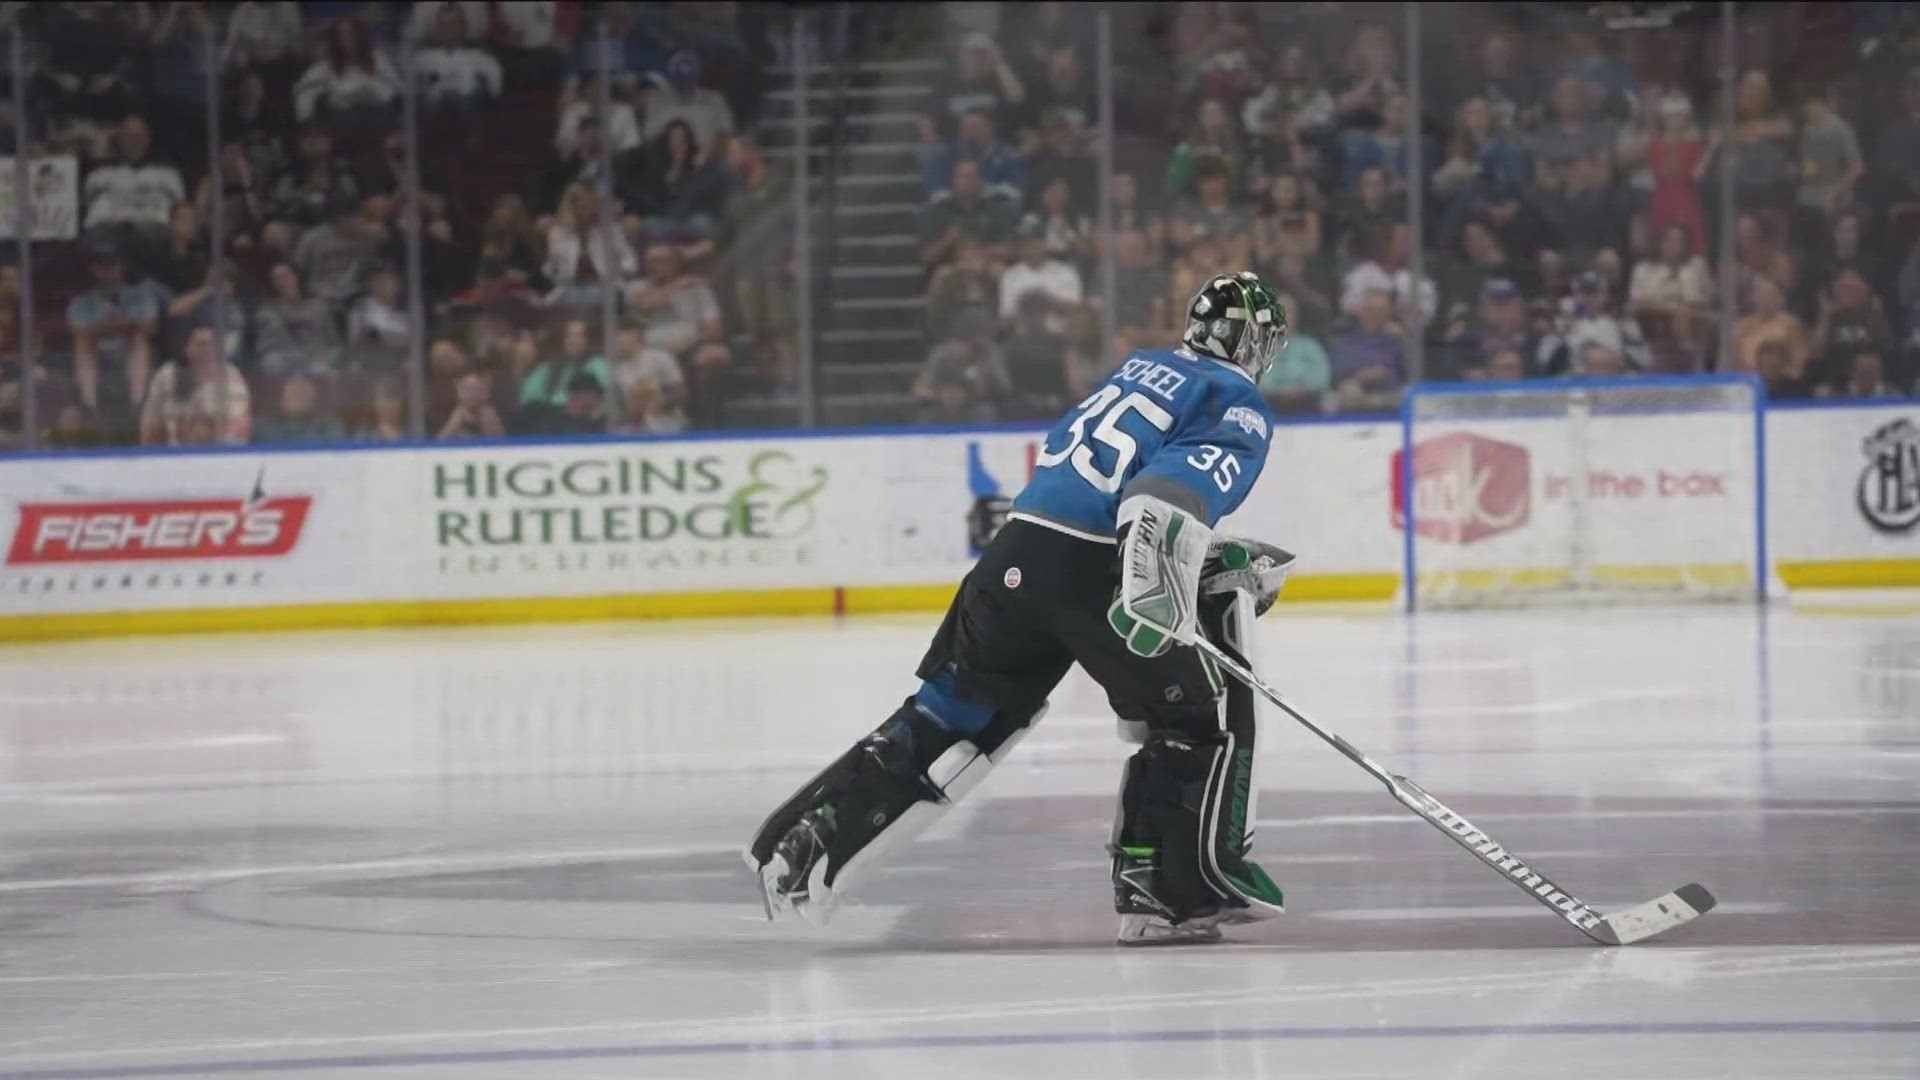 Find our swagger Steelheads look to rewrite Kelly Cup Finals in Florida ktvb